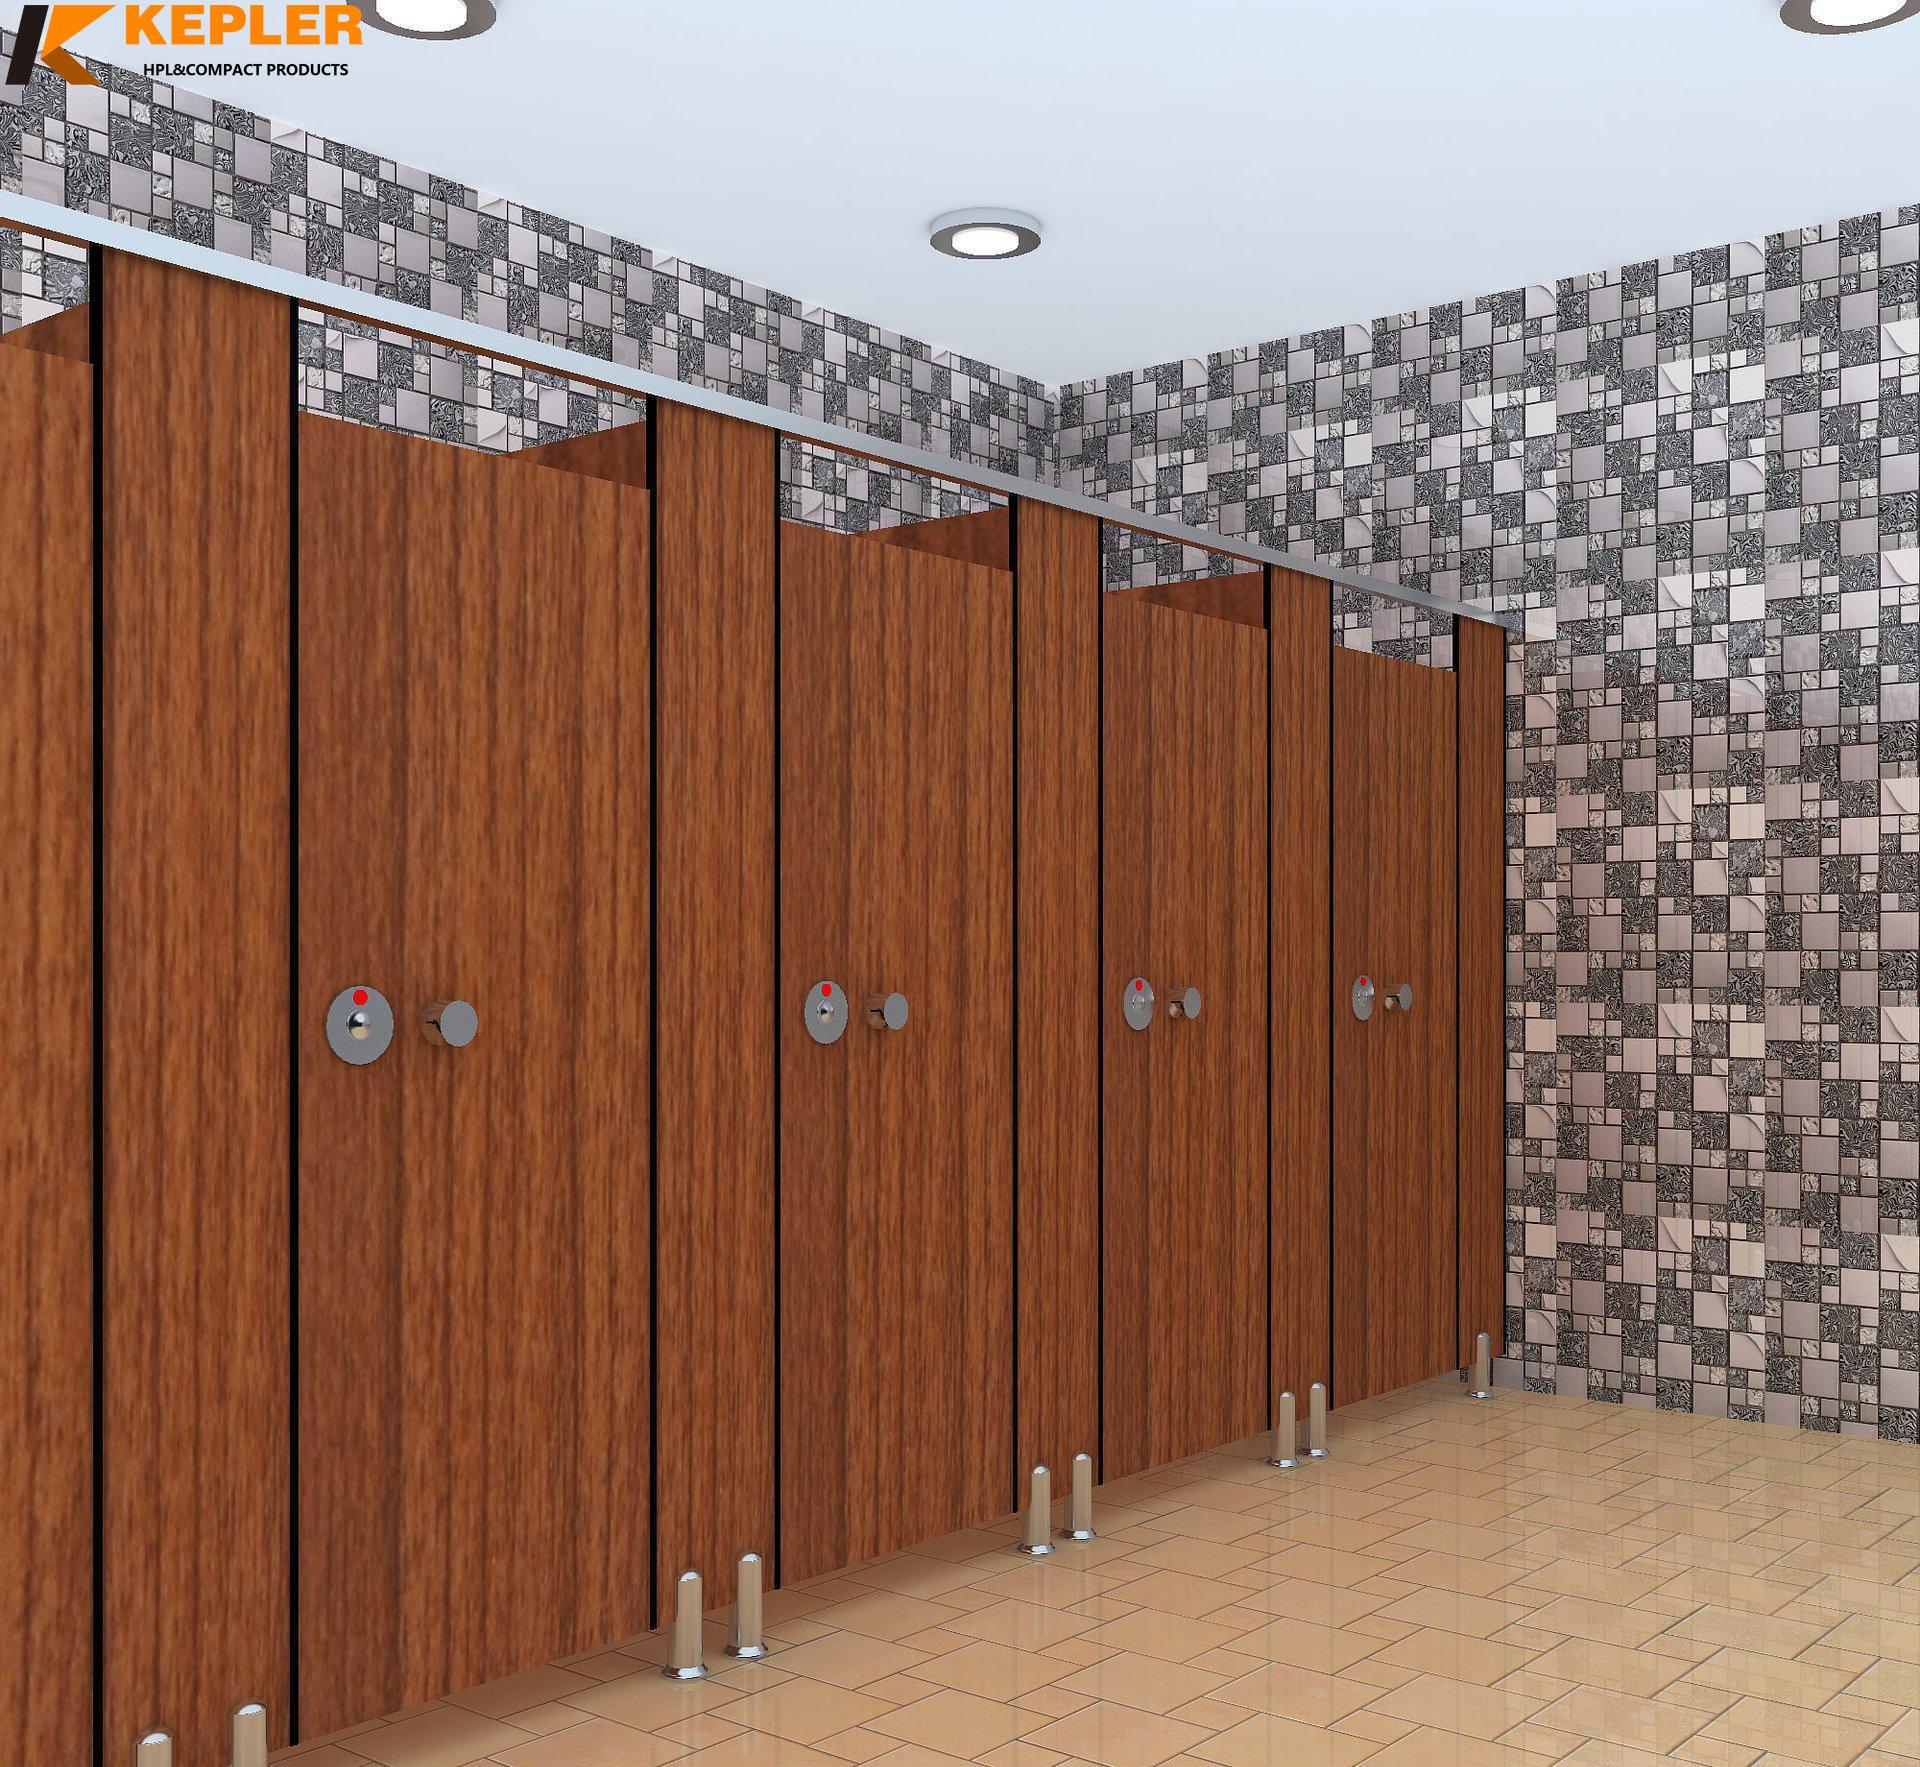  Kepler hot sell hpl ceiling hung bathroom toilet cubicle partitions door and accessories Kepler hot sell hpl ceiling hung bathroom toilet cubicle partitions door and accessories